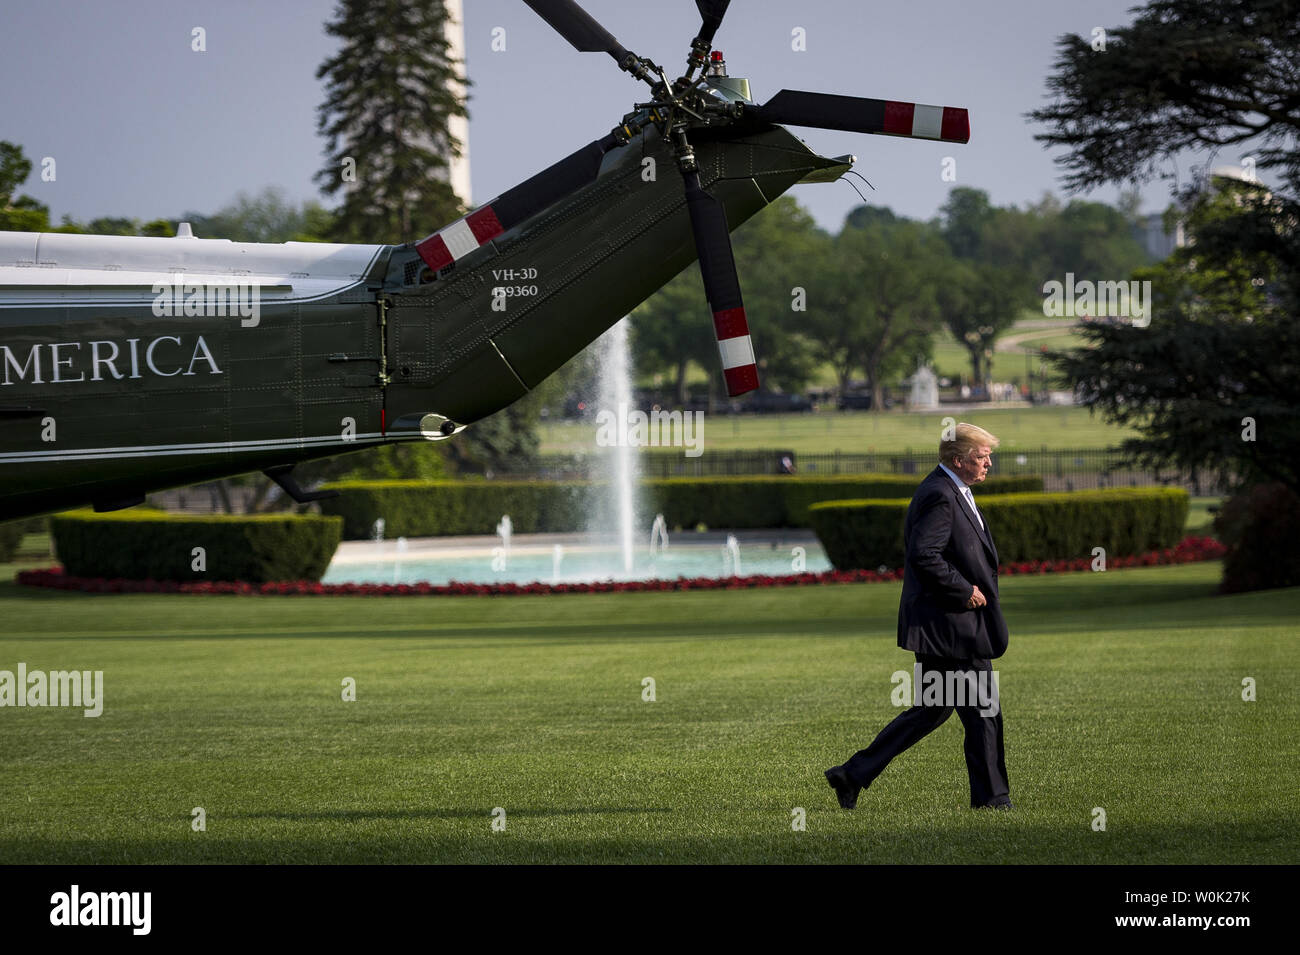 President Donald Trump makes his way from Marine One on the South Lawn to the Oval Office of the White House on May 15, 2018 in Washington, D.C. Trump was returning from Walter Reed Medical Center where he visited with First Lady Melania Trump who is convalescing following a kidney procedure yesterday. The First Lady's office has reported "the First Lady remains in good spirits.”    Photo by Pete Marovich/UPI Stock Photo